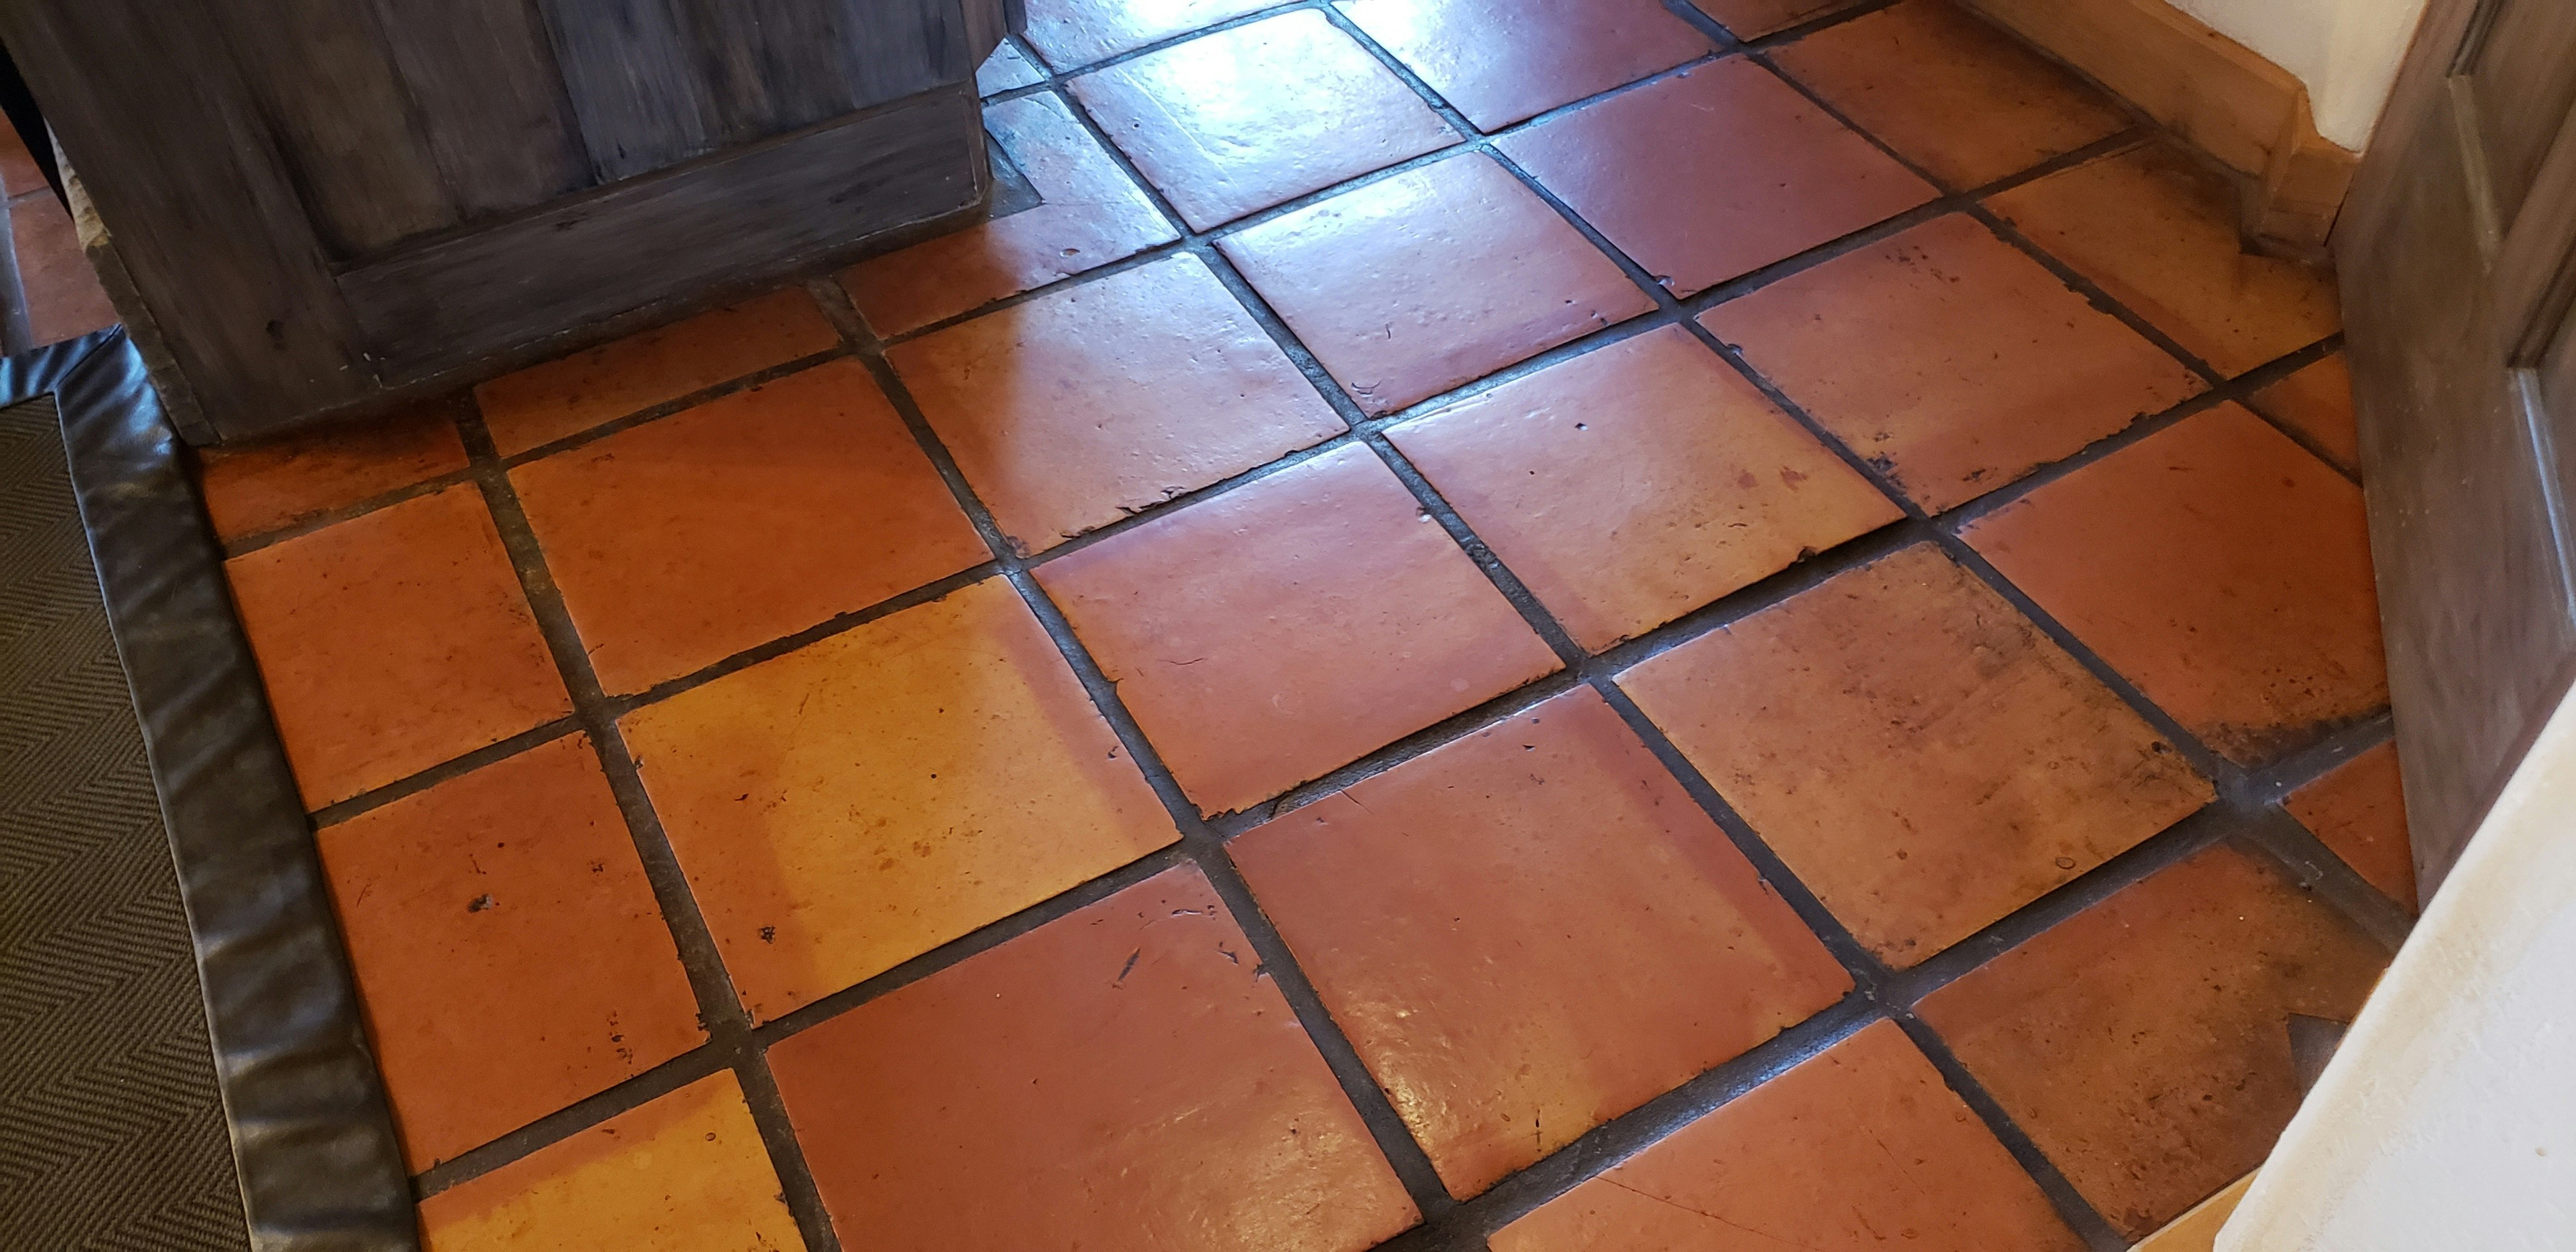 These reddish-orange tiles have radiant heat to keep toes toasty all winter long.